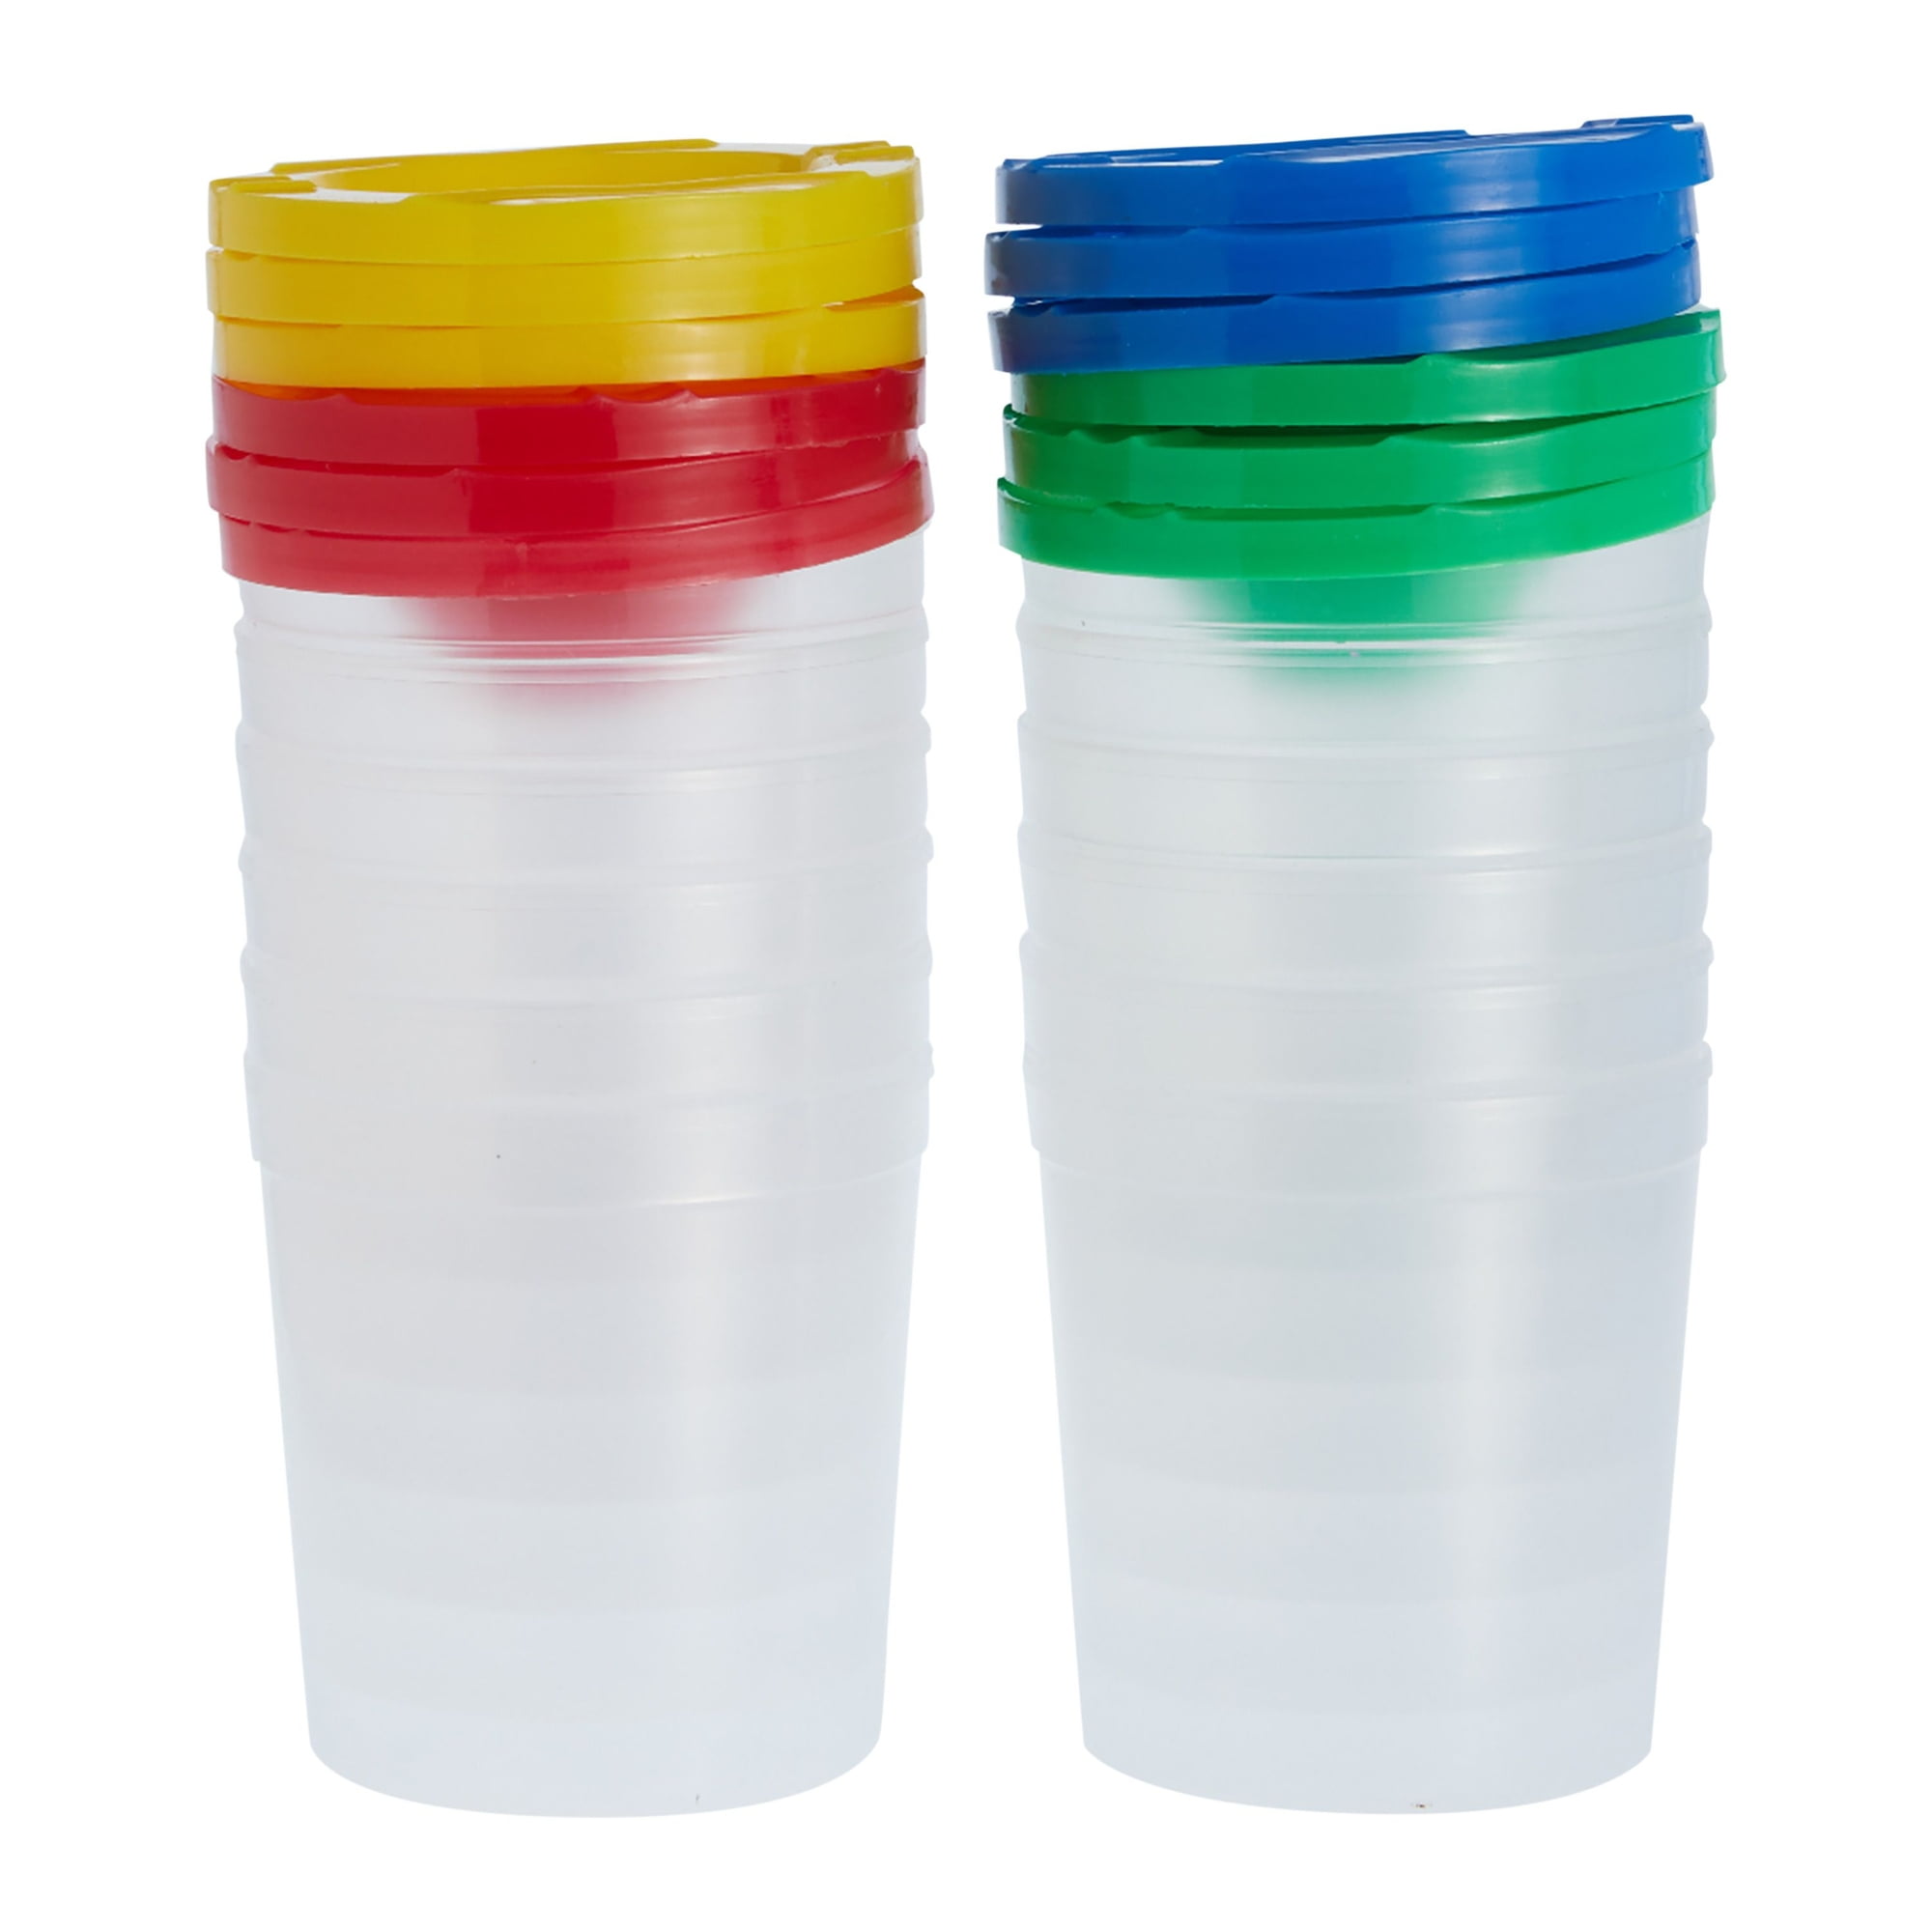 12 Pack No Spill Paint Cups with Lids for Kids, Art and Crafts Supplies for Classroom, 4 Colors, 3 x 3 in